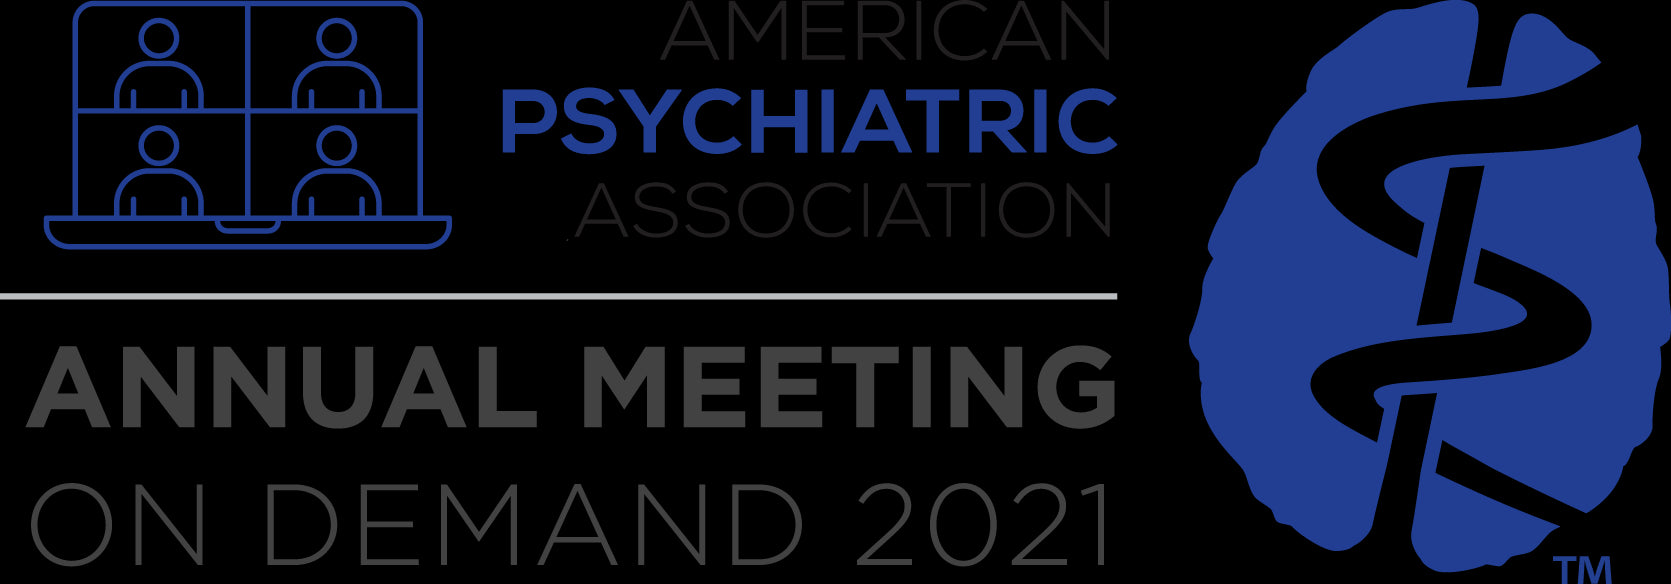 APA (American Psychiatric Association) Annual Meeting On Demand 2021 - Medical Videos | Board Review Courses